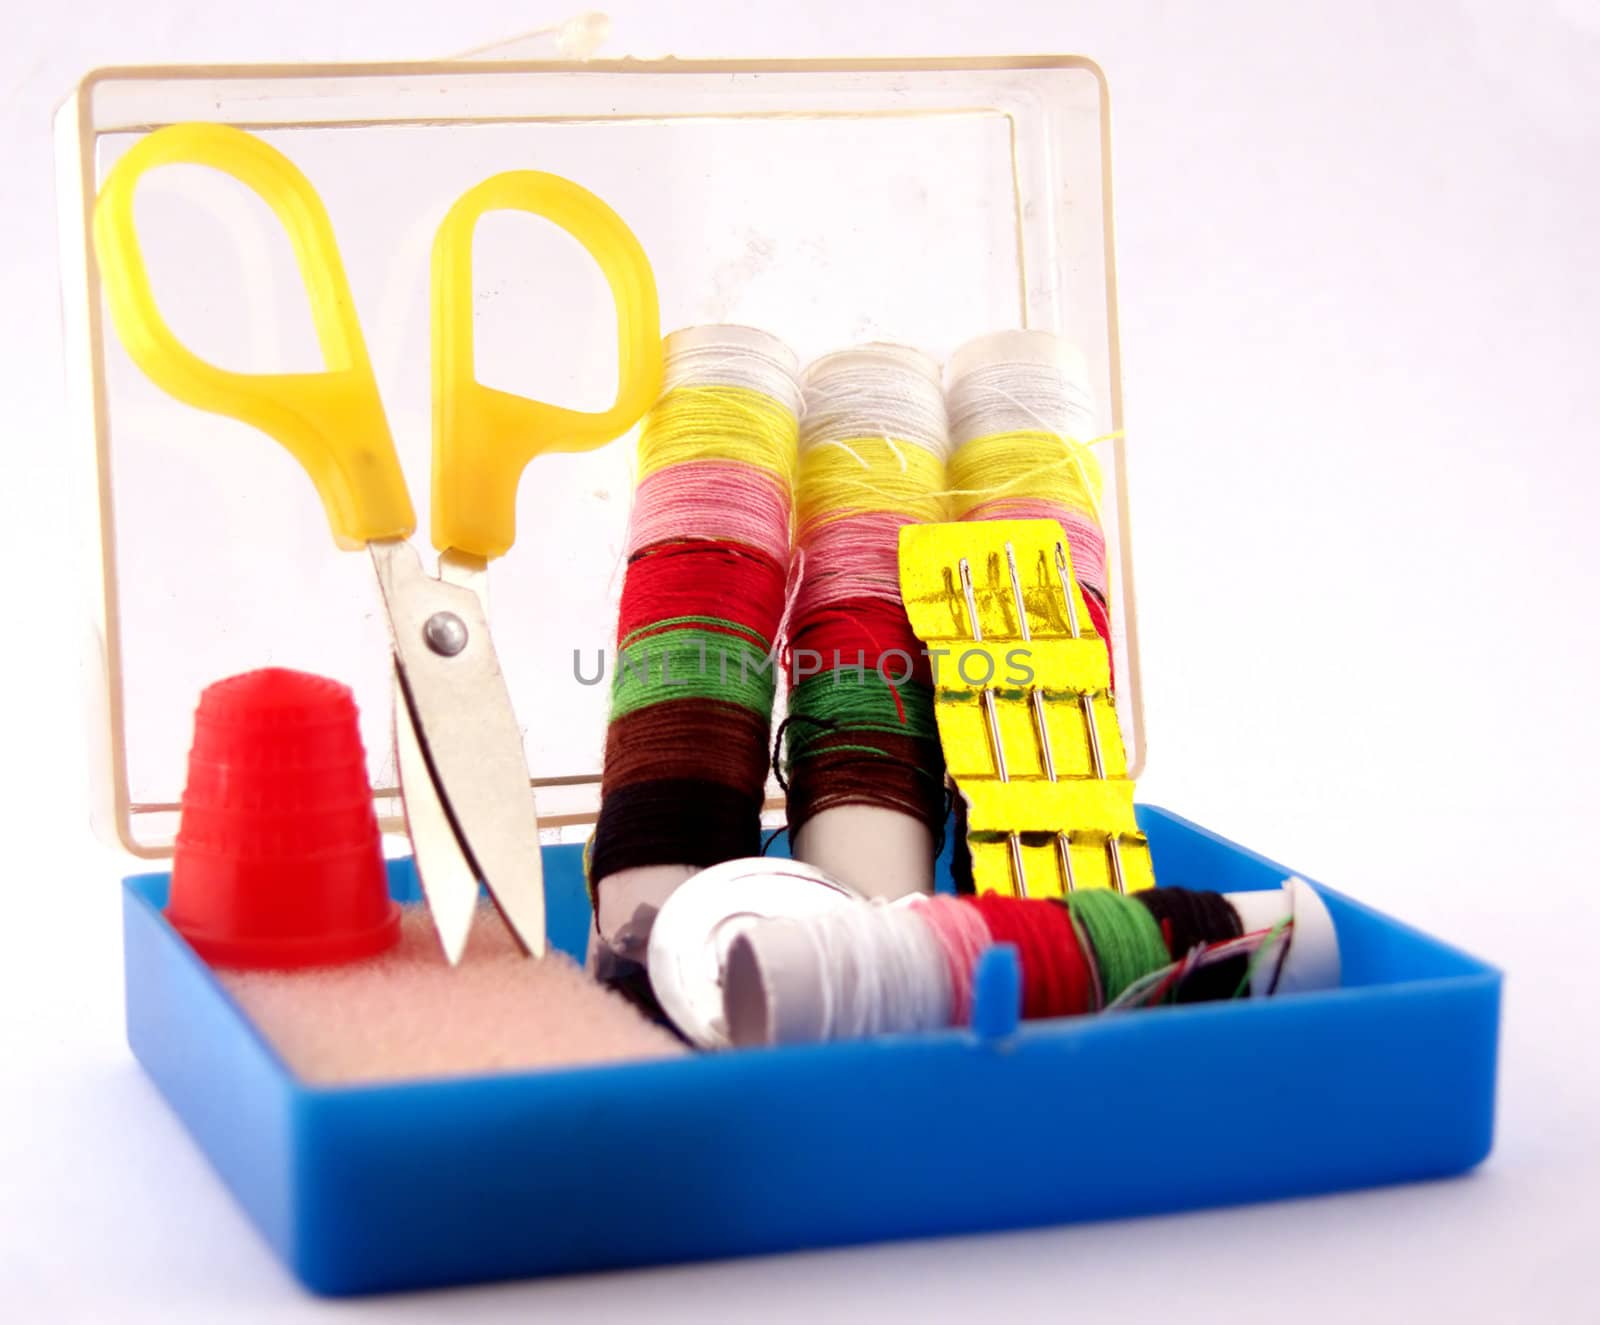 portrait of sew kit box and accessory